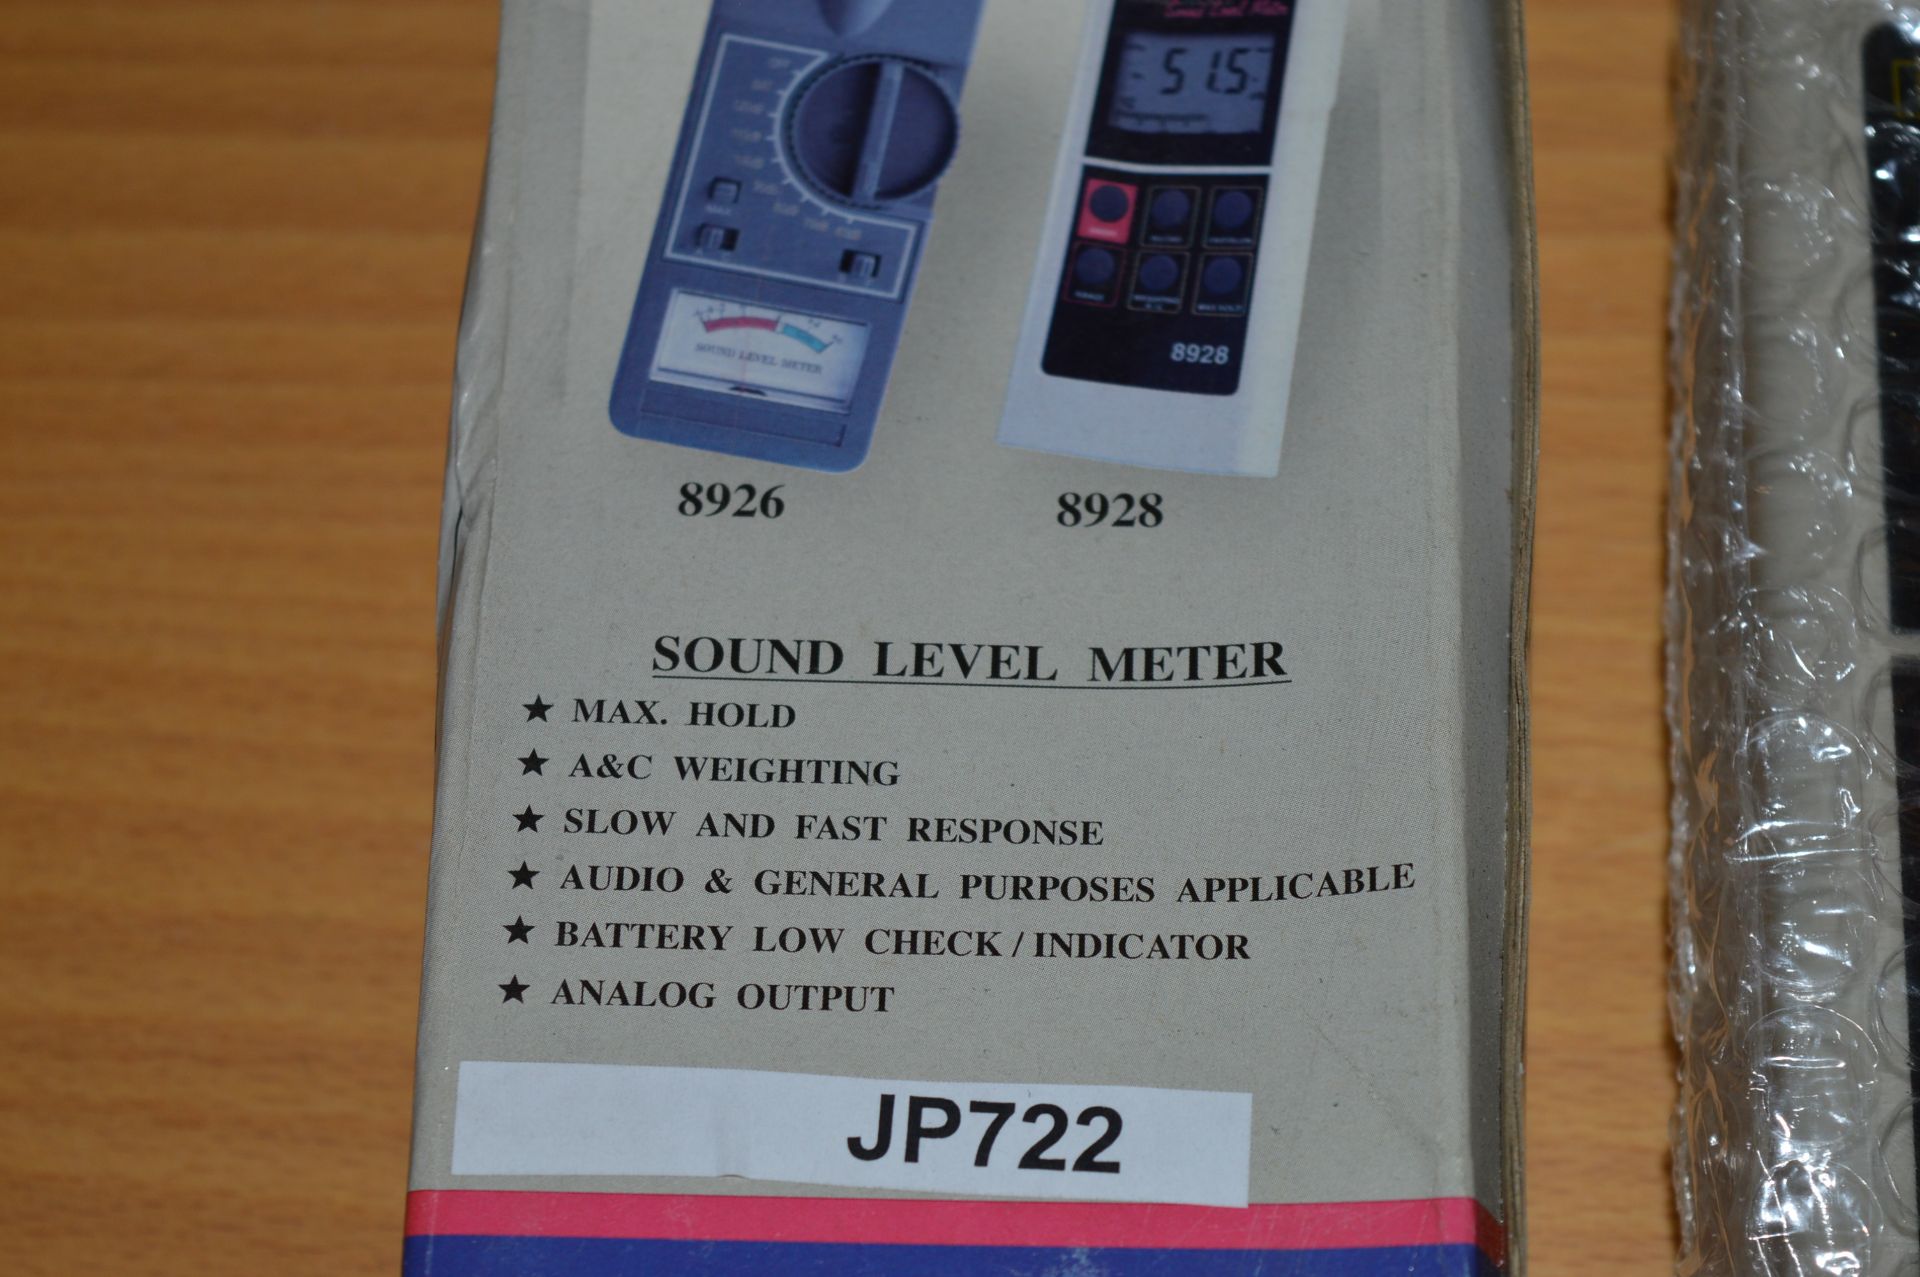 1 x Portable Sound Level Meter - Midel AZ 8928  - Boxed With Instructions, Software CD and Product - Image 3 of 4